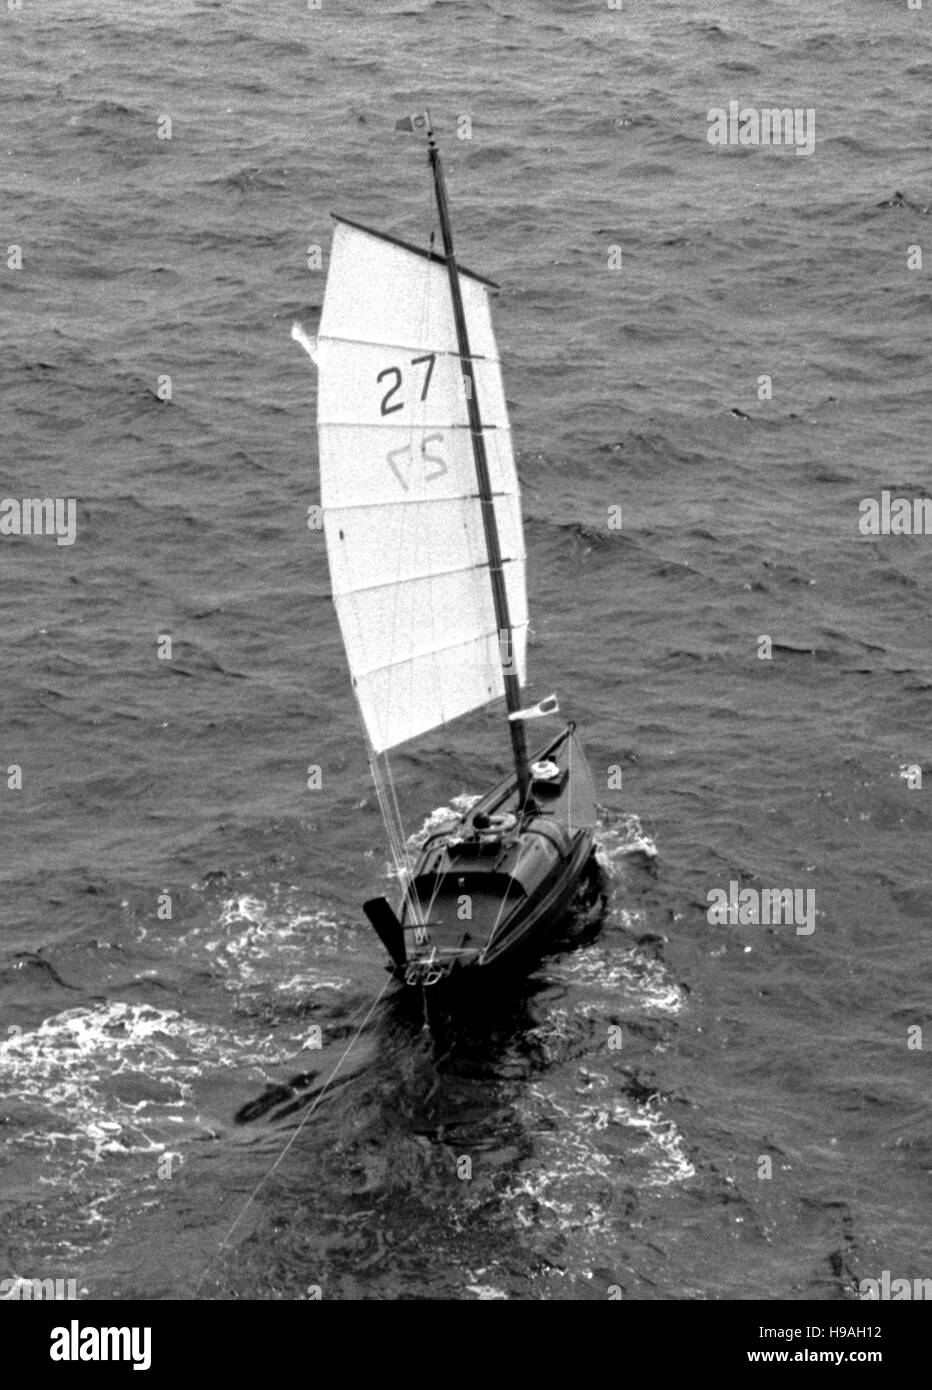 AJAX NEWS PHOTOS. 7TH JUNE, 1980. PLYMOUTH,ENGLAND. - OSTAR START - MIKE RITCHIE SAILING JESTER, ONE OF THE SMALLEST YACHTS IN THE RACE TO NEWPORT R.I.  PHOTO:JONATHAN EASTLAND/AJAX REF:800706 15 Stock Photo